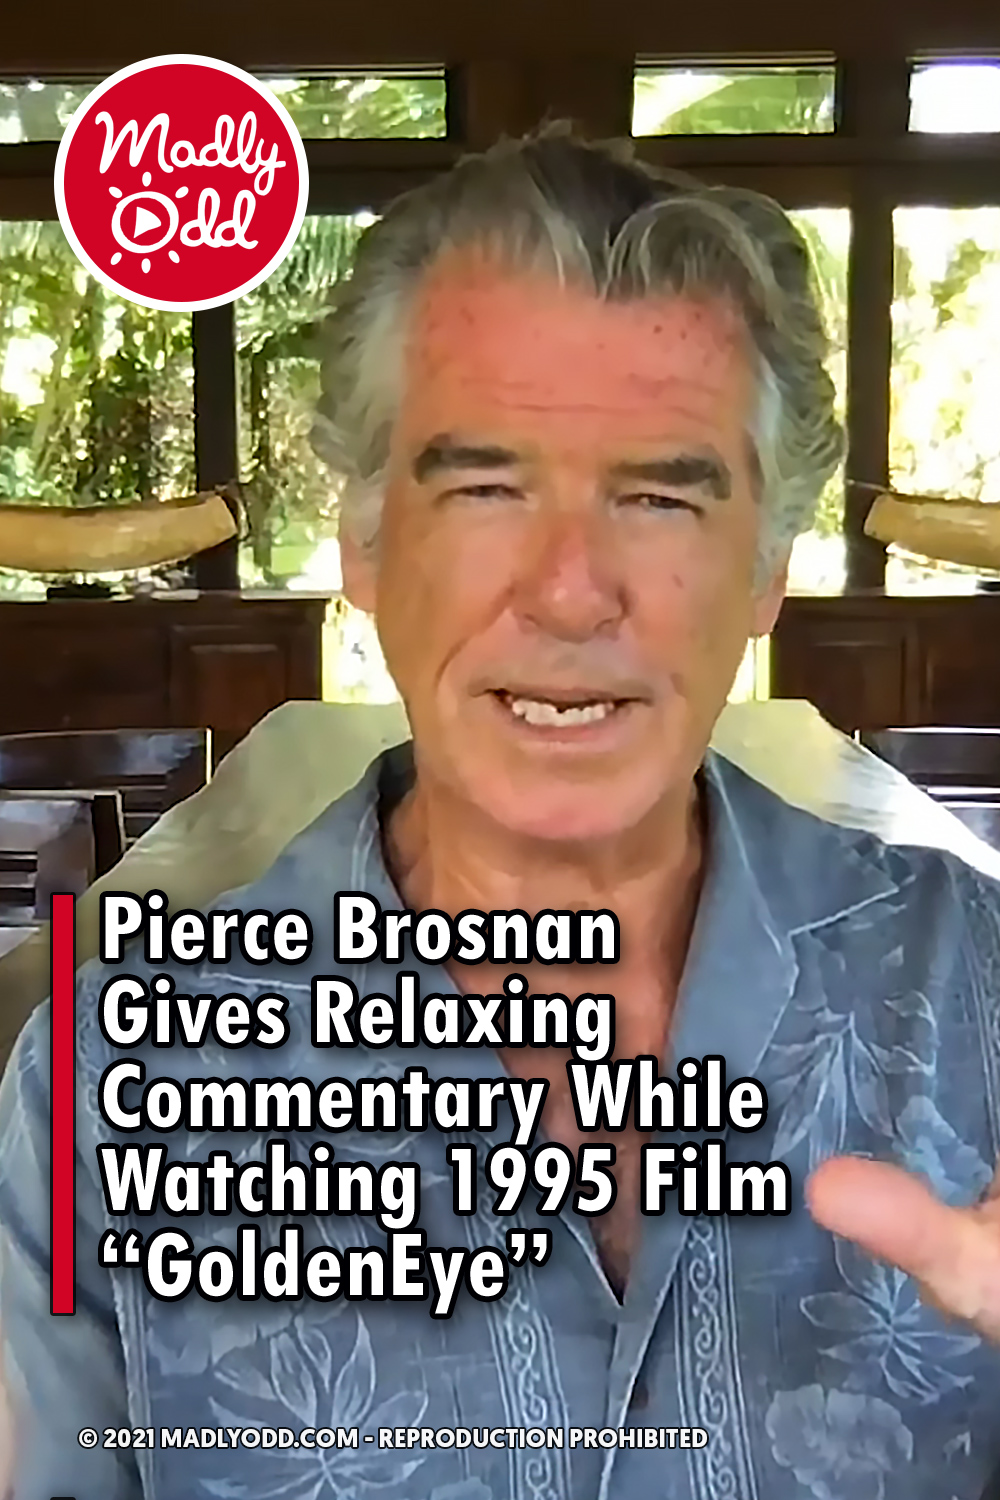 Pierce Brosnan Gives Relaxing Commentary While Watching 1995 Film “GoldenEye”